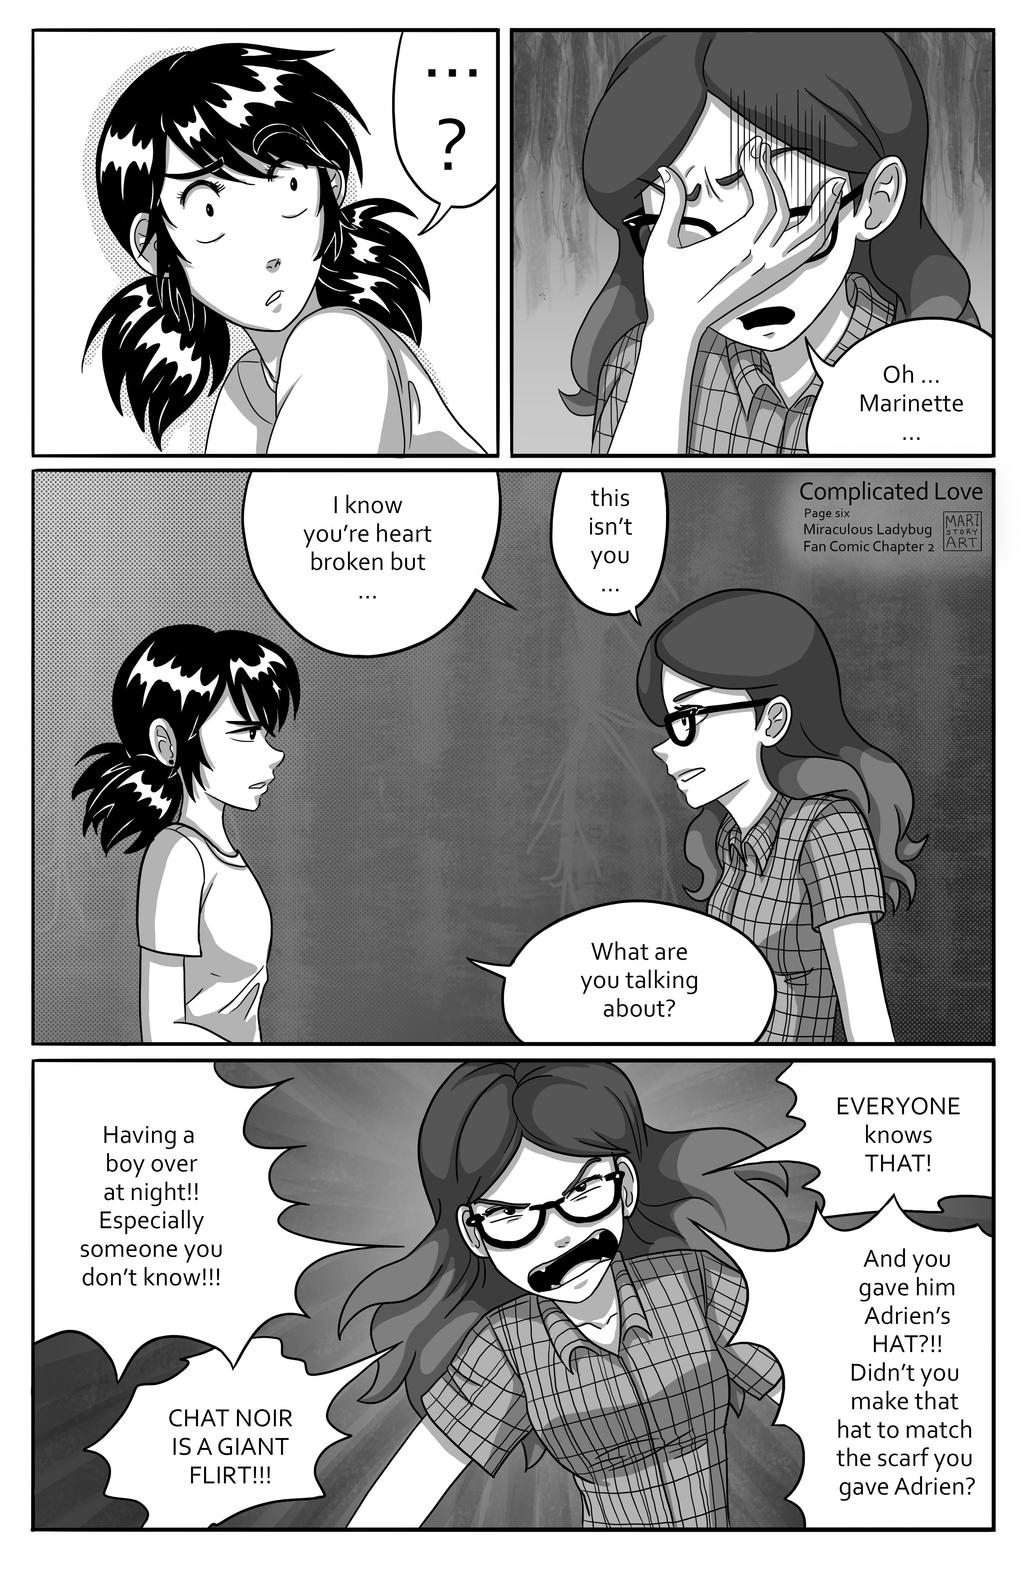 Complicated Love Page Six Chapter2 By Maristoryart On